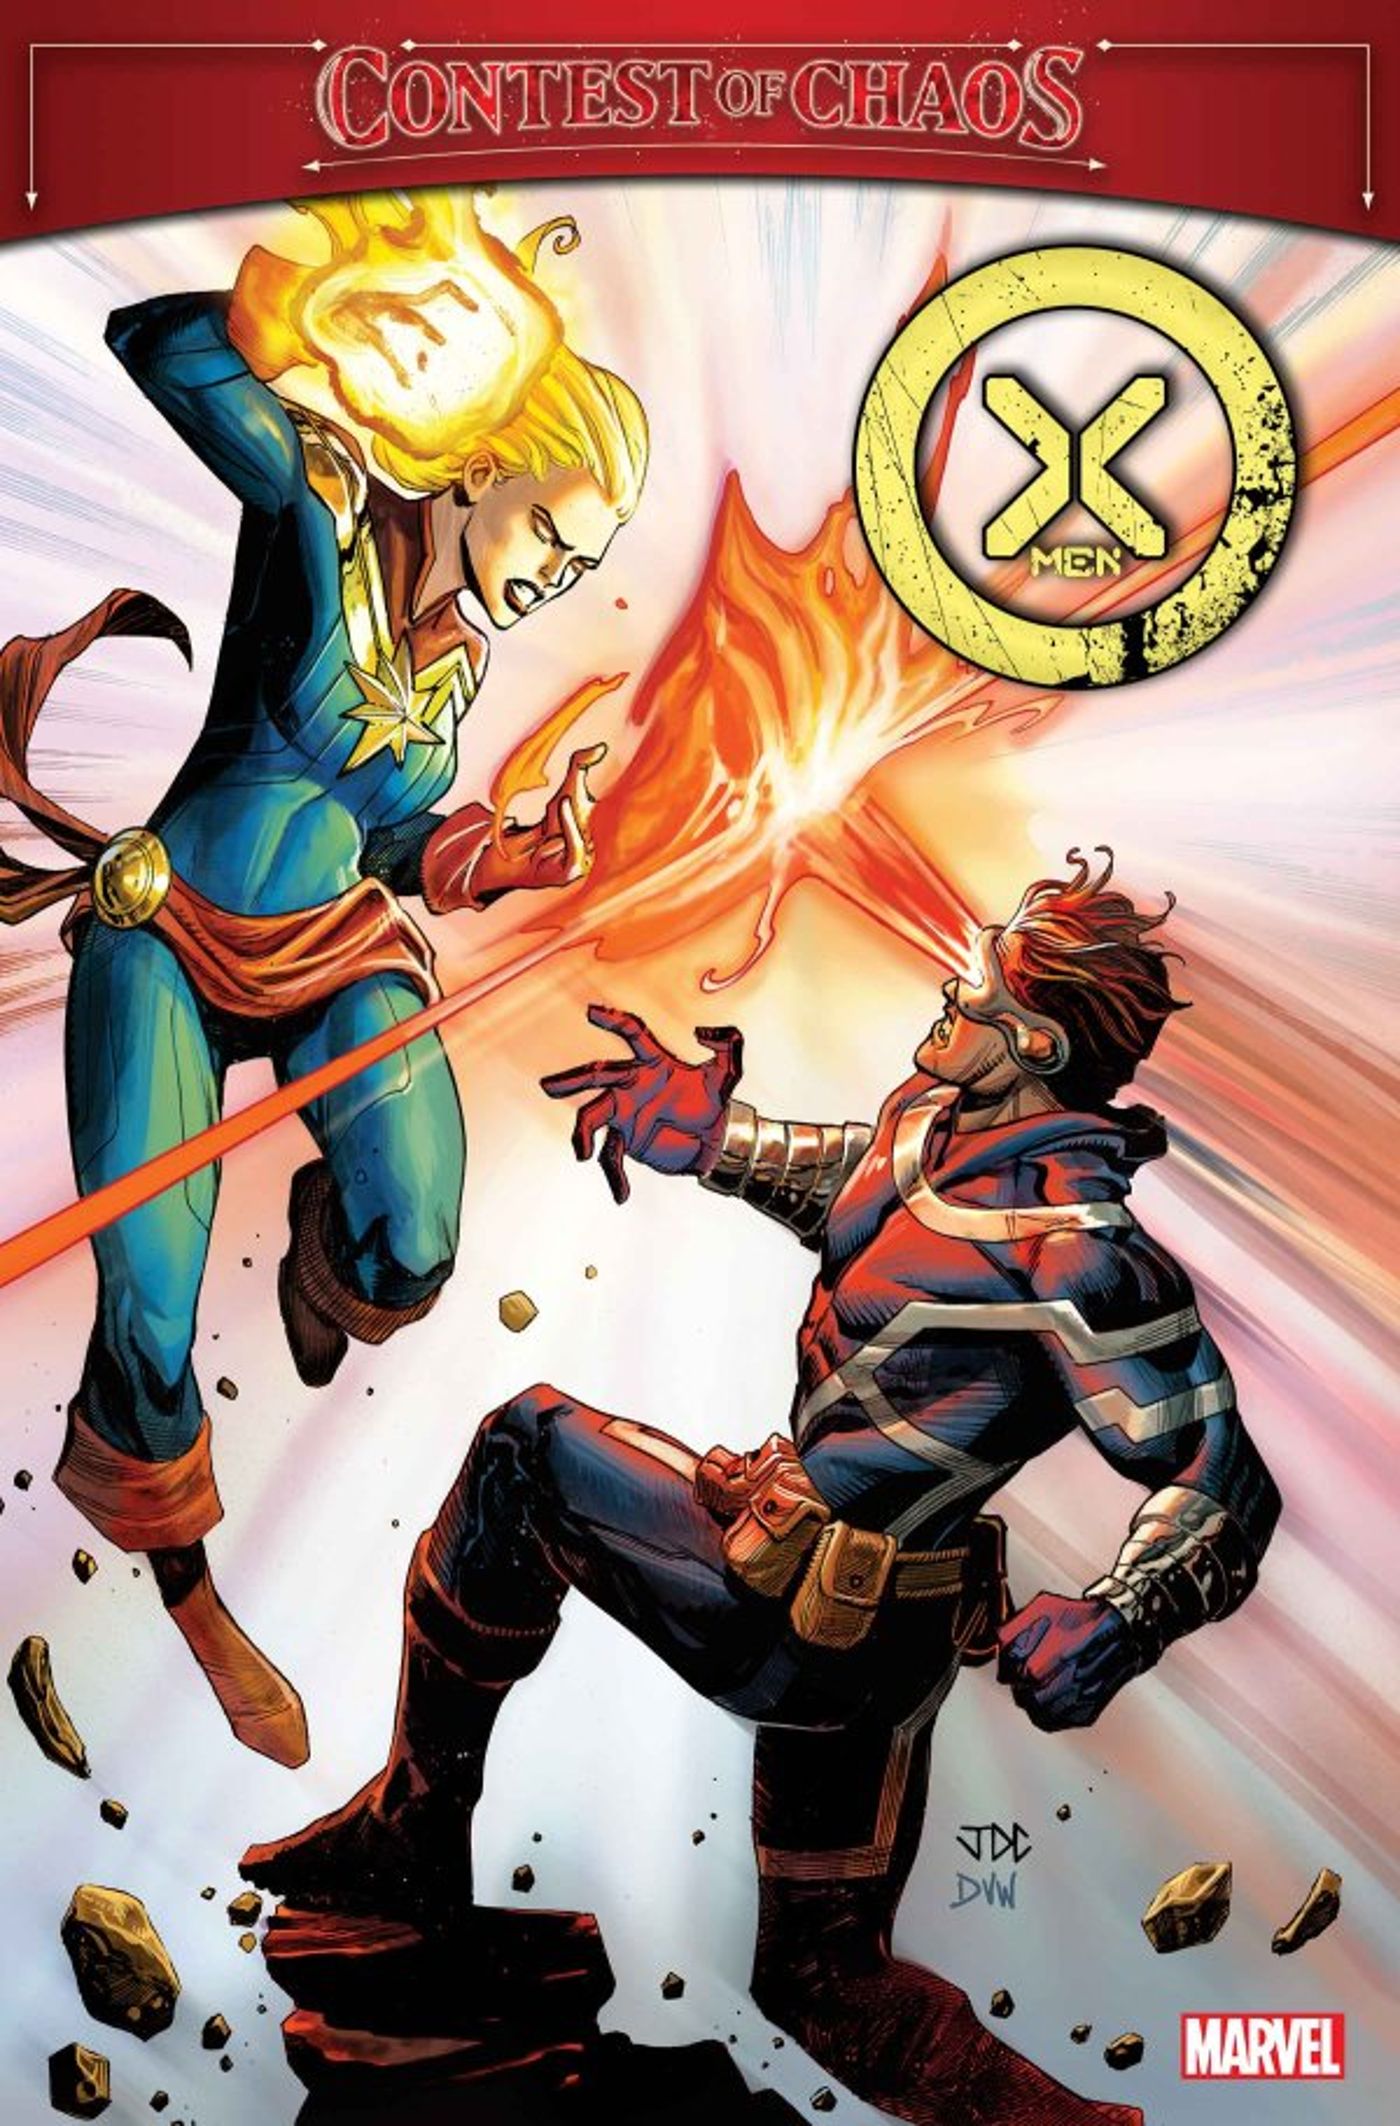 ‘Worlds Apart’: The Avengers’ & X-Men’s Leaders Are Different in 1 Key Way